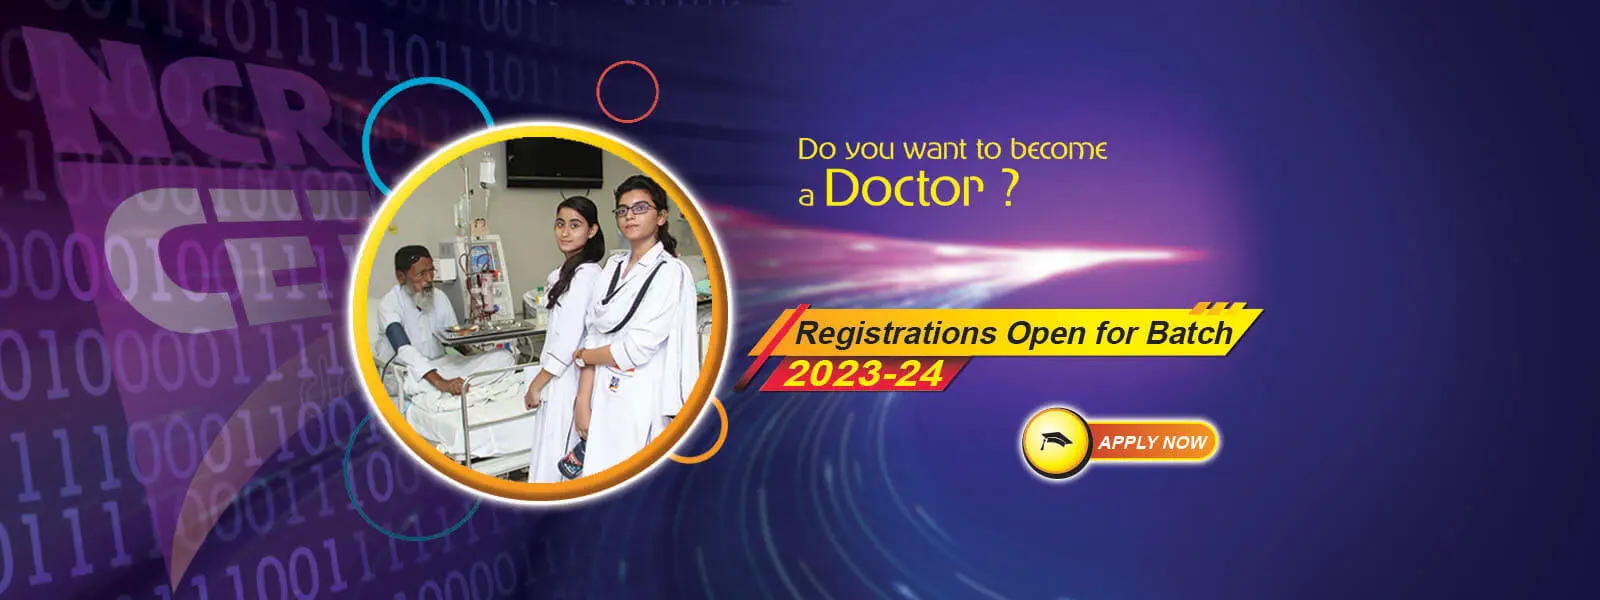 Become a Doctor